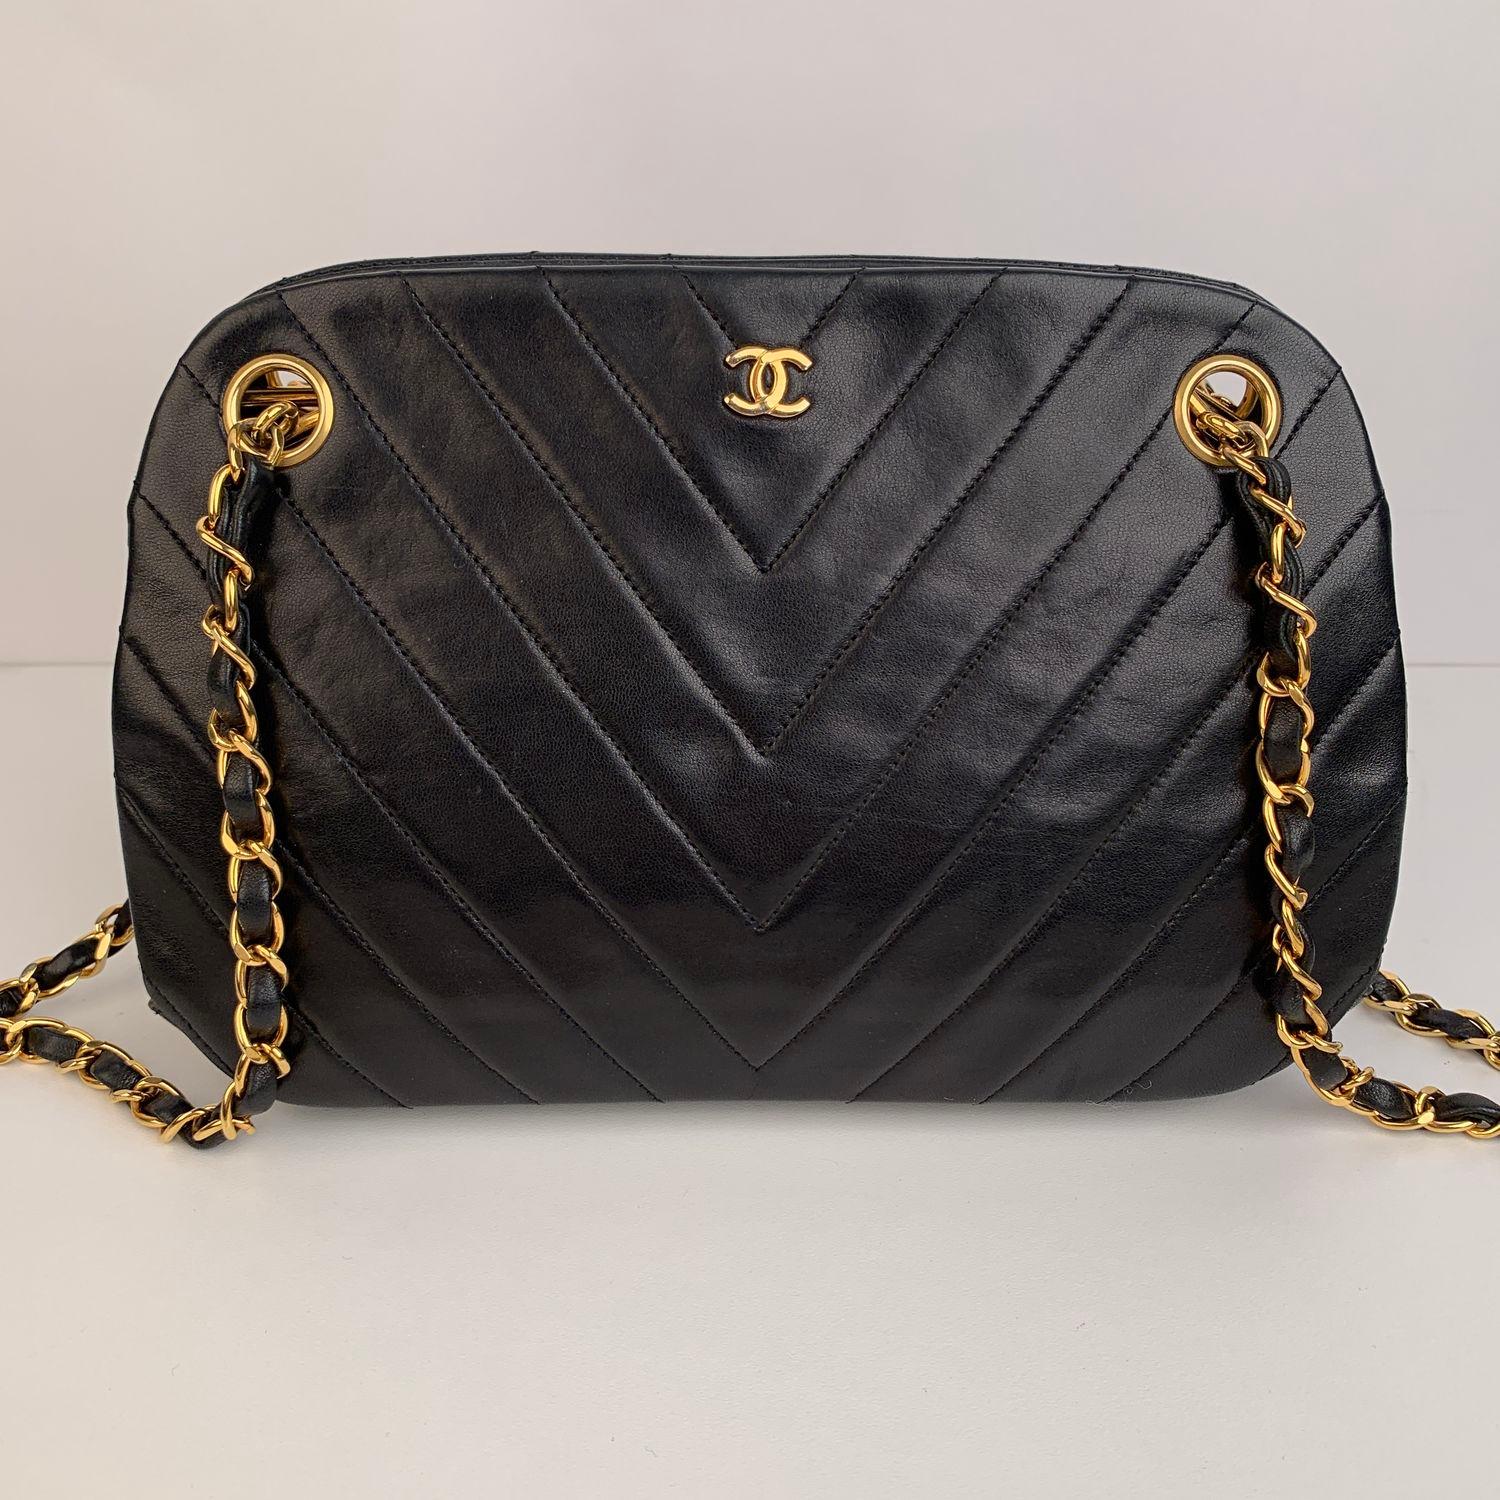 Sophisticated black Chevron V-quilted leather shoulder bag by CHANEL with double gold metal chain and interwoven leather shoulder straps. Gold metal CC - CHANEL logo on the front. The bag has a main compartment (with kiss lock closure) with other 2